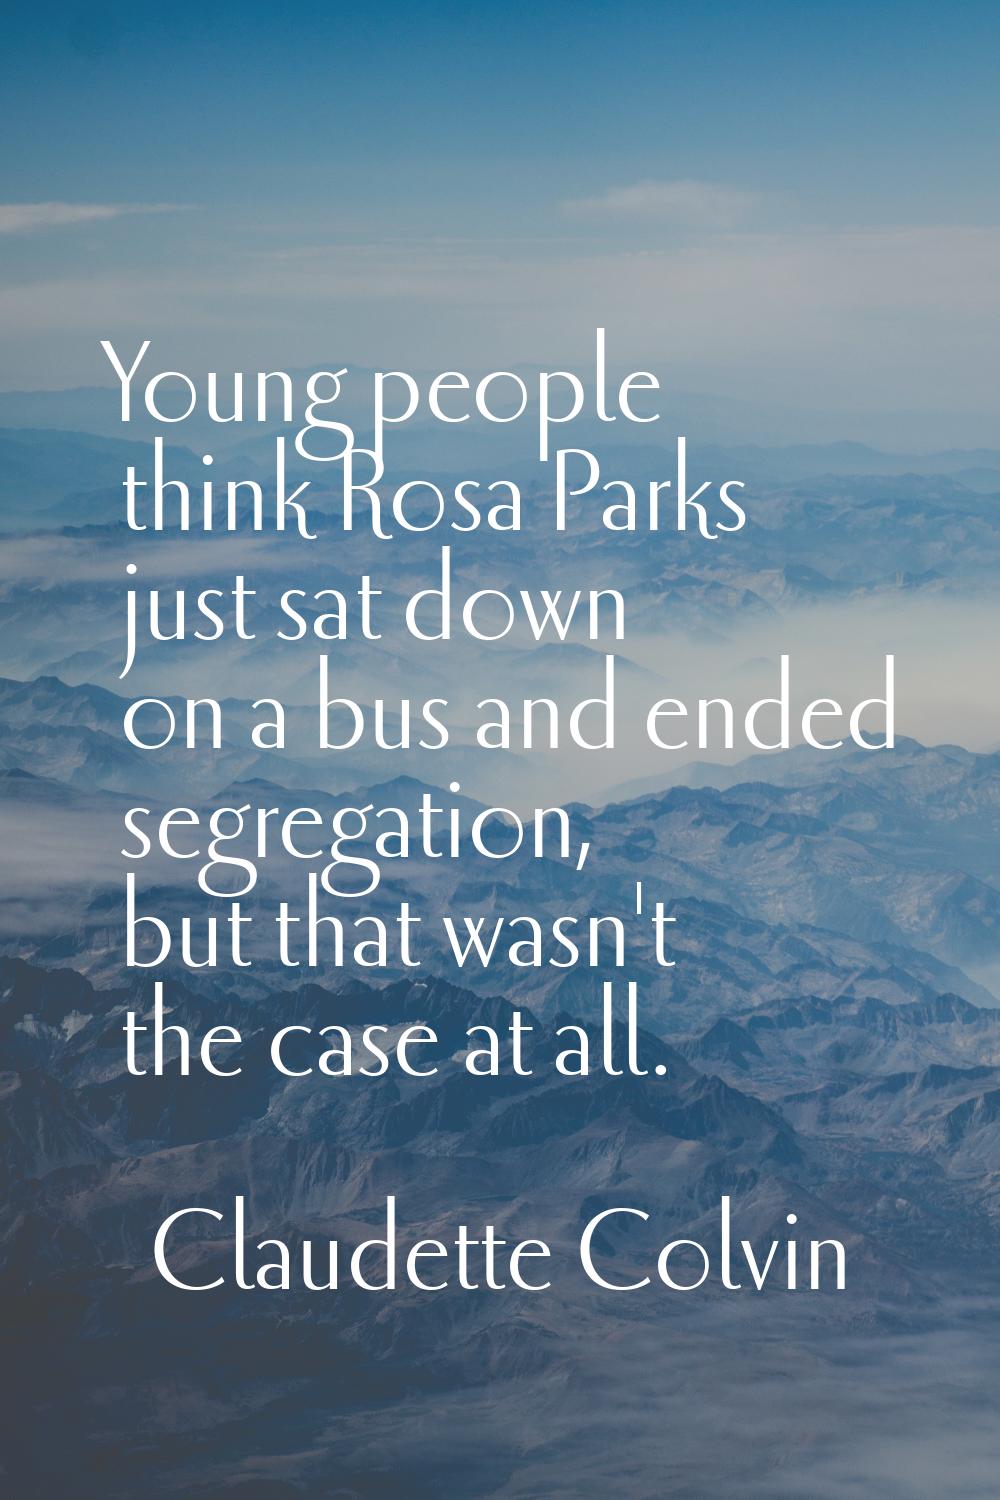 Young people think Rosa Parks just sat down on a bus and ended segregation, but that wasn't the cas